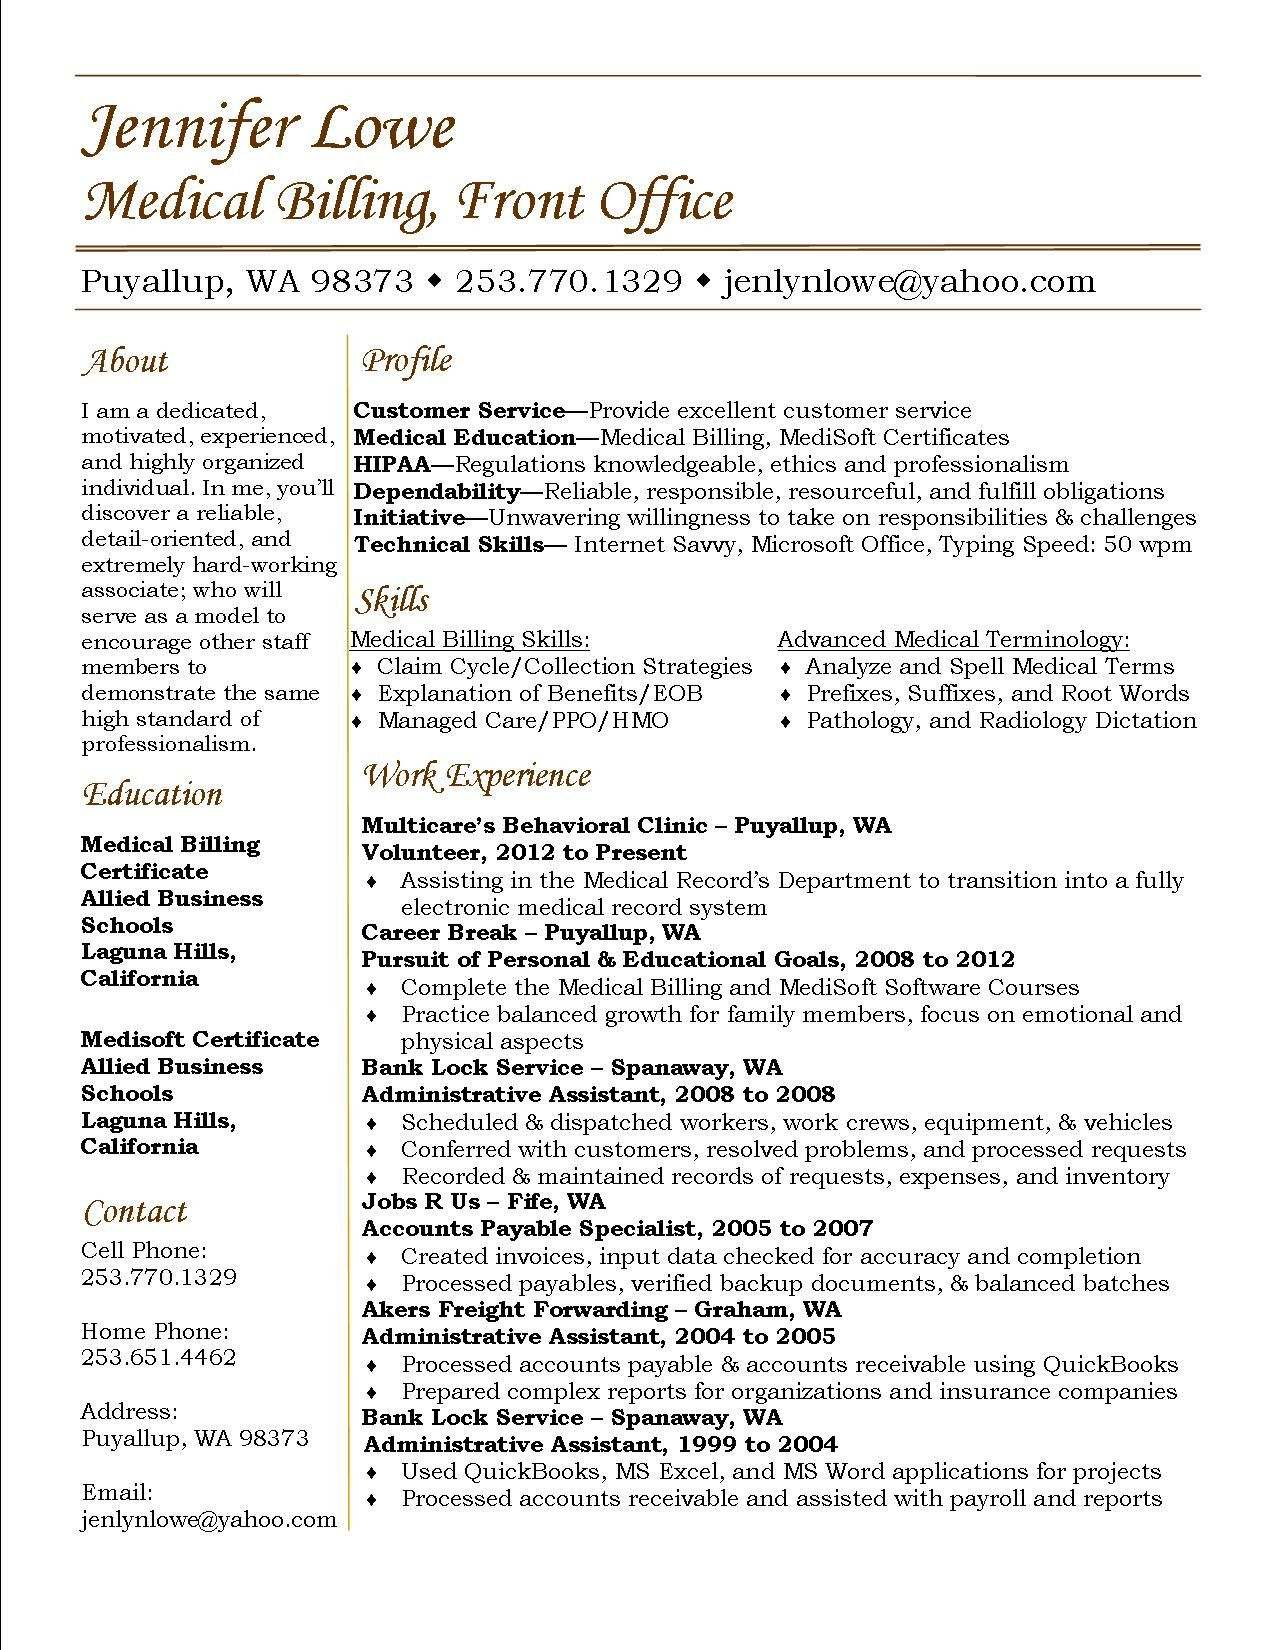 Sample Resume for Medical Billing and Coding with No Experience 12 New Year New Career Ideas Medical Coding, Medical Billing and …